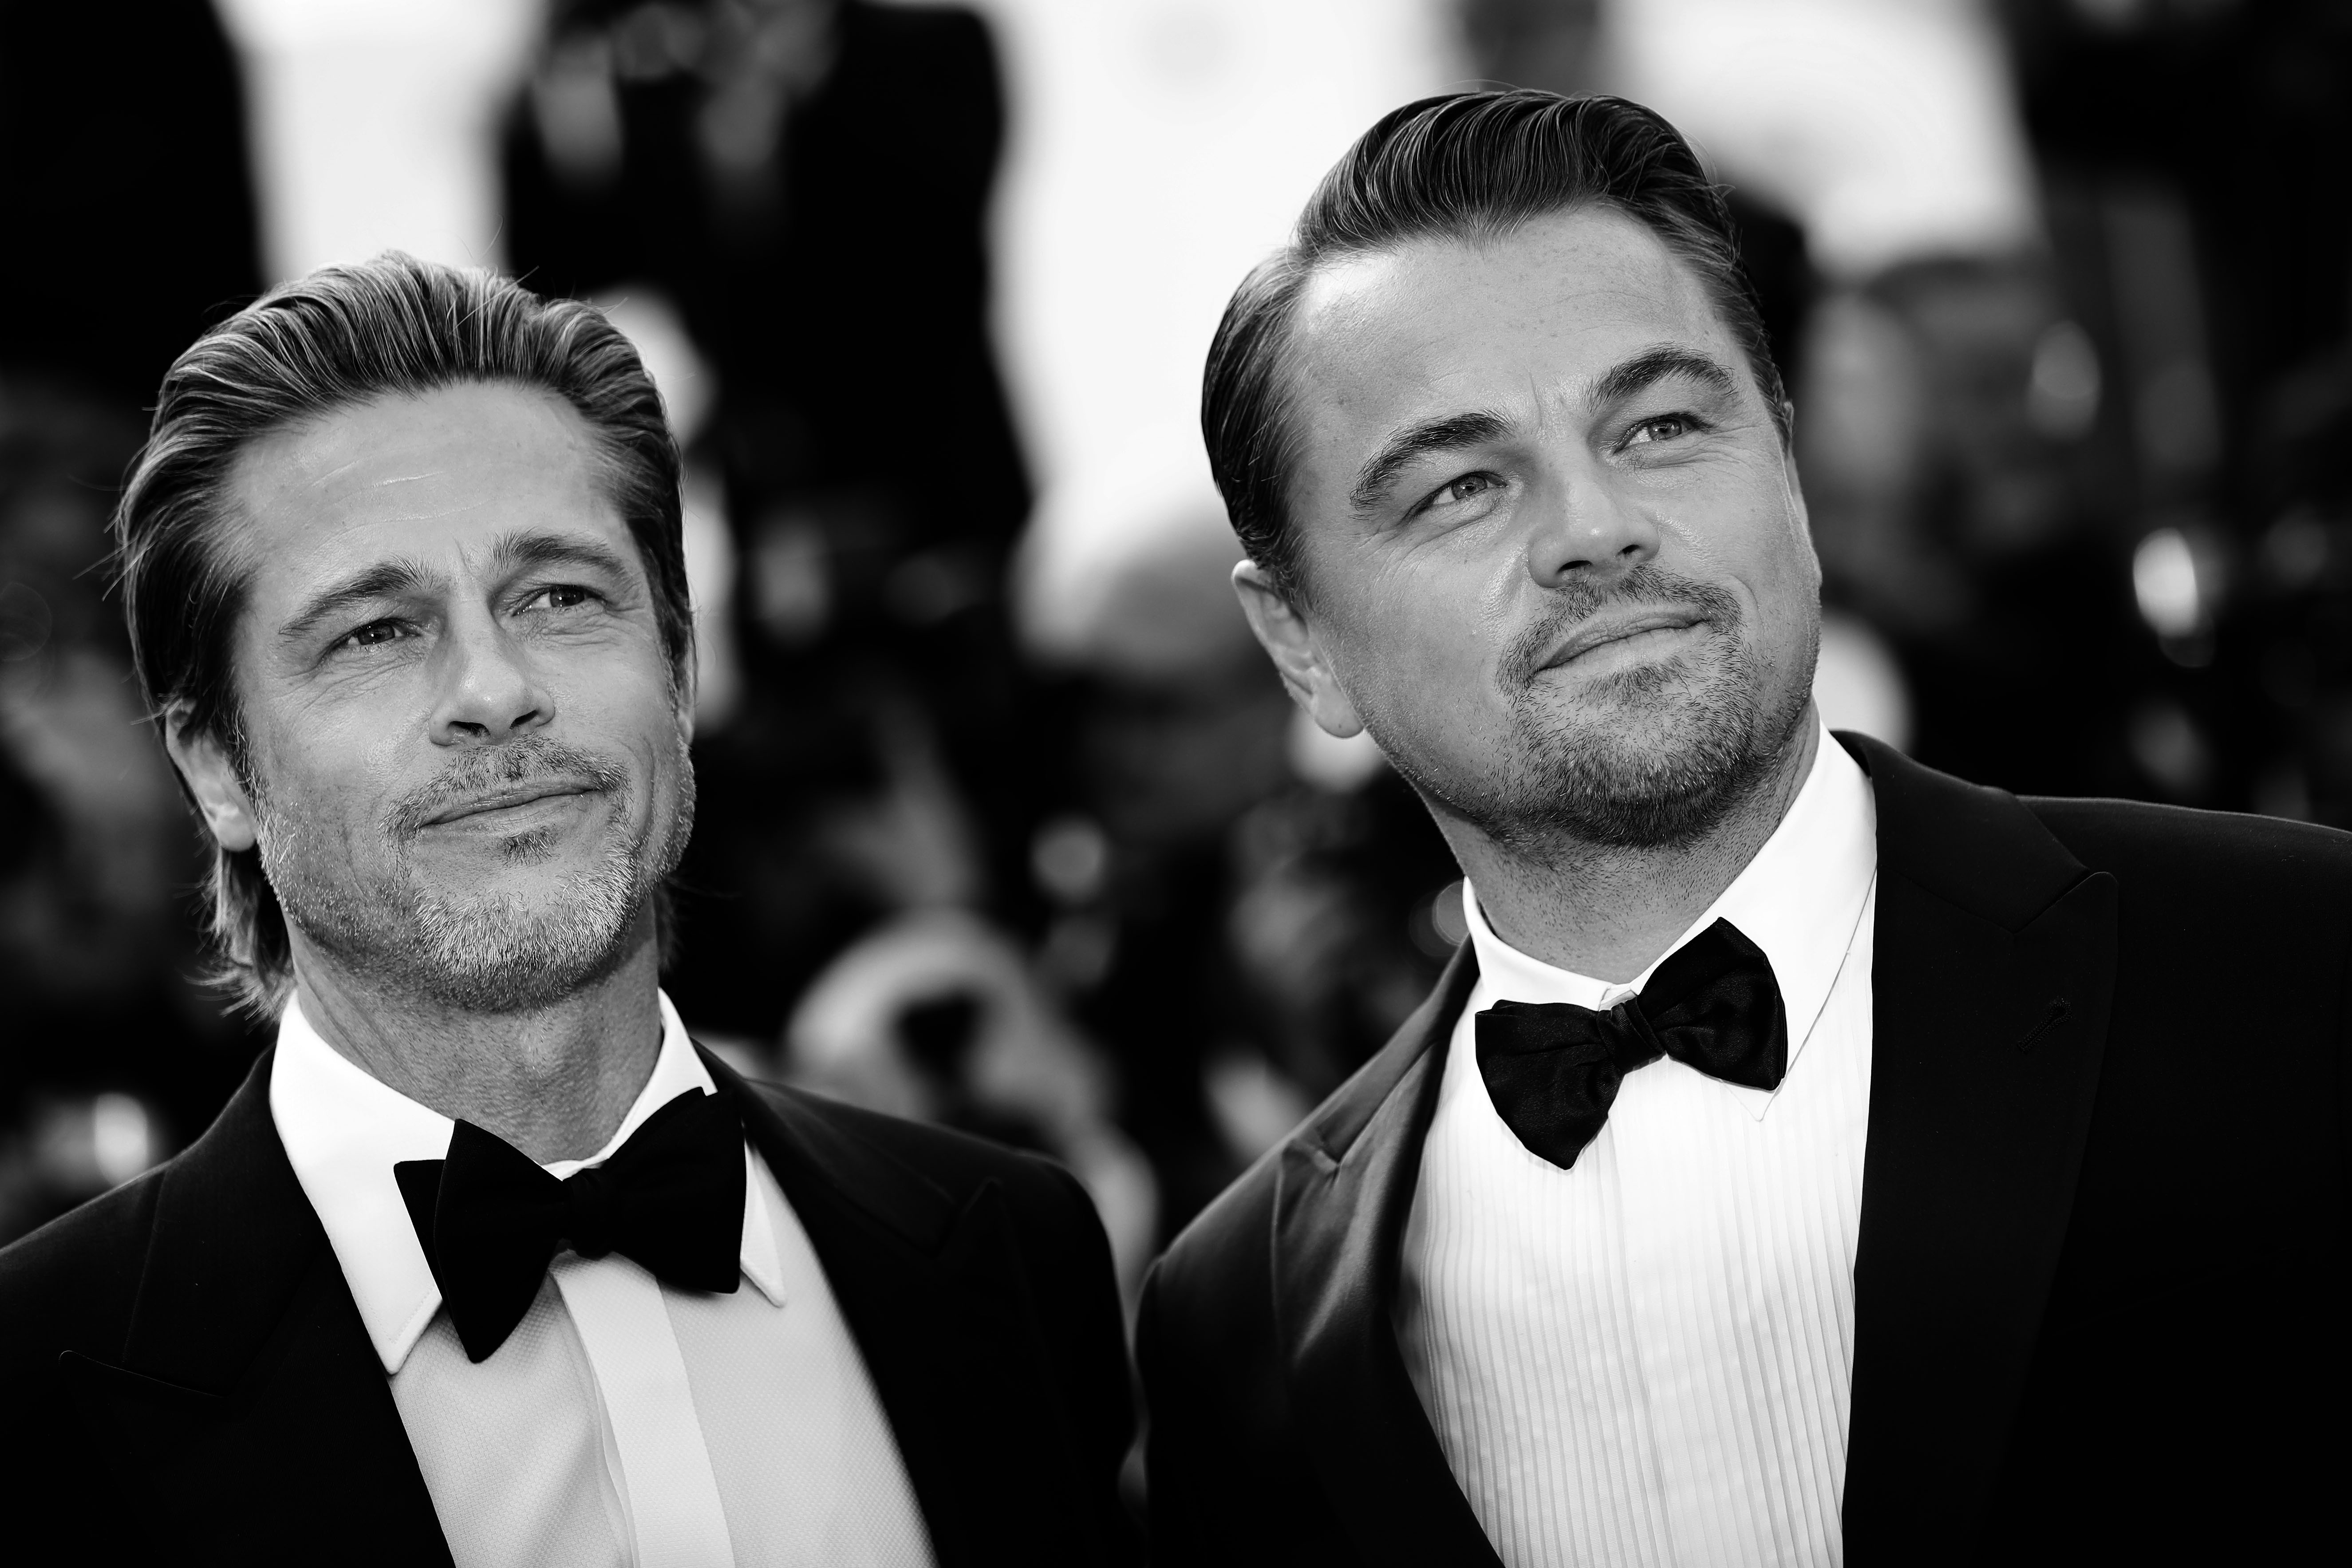 Brad Pitt and Leonardo DiCaprio attend the screening of "Once Upon A Time In Hollywood" during the 72nd annual Cannes Film Festival on May 20, 2019 in Cannes, France.